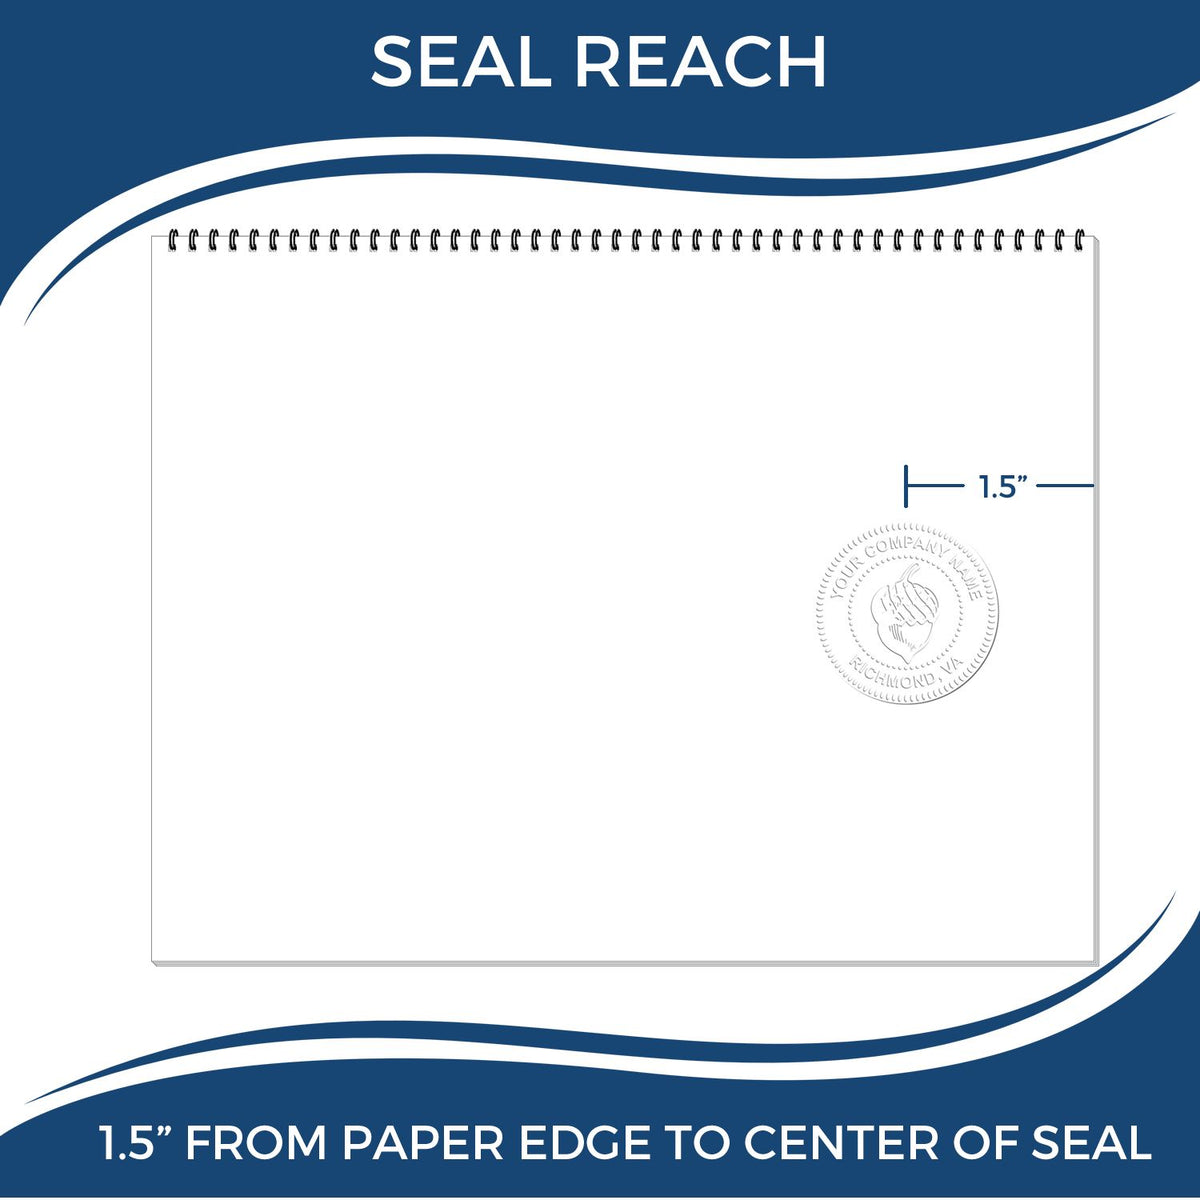 An infographic showing the seal reach which is represented by a ruler and a miniature seal image of the Gift Guam Landscape Architect Seal